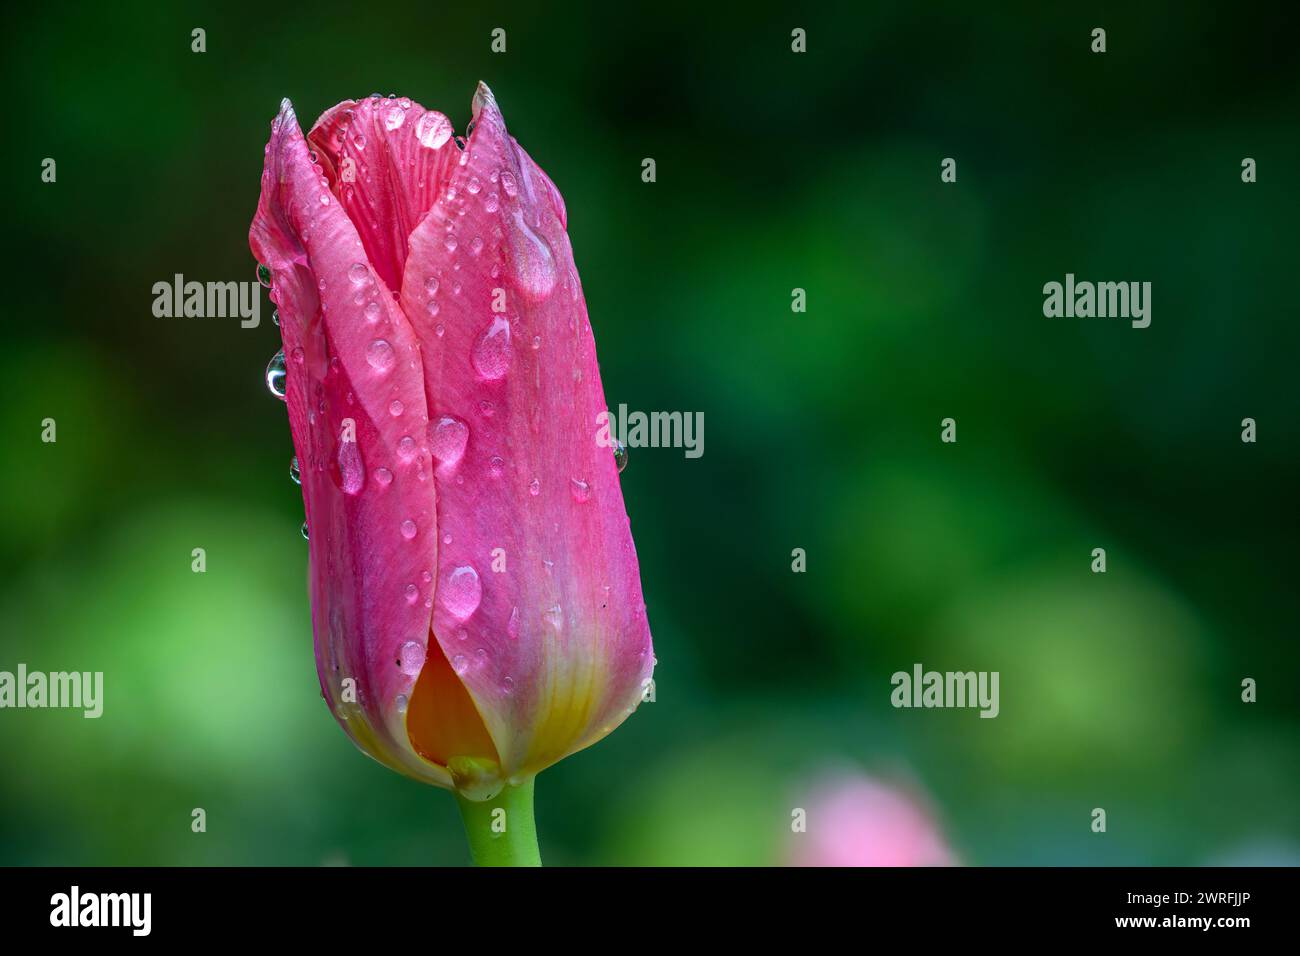 Brighton, March 12th 2024: A tulip covered in rain droplets shelters against the elements after yet another heavy downpour of rain N.B. THIS IS A FOCUS-STACKED IMAGE Stock Photo